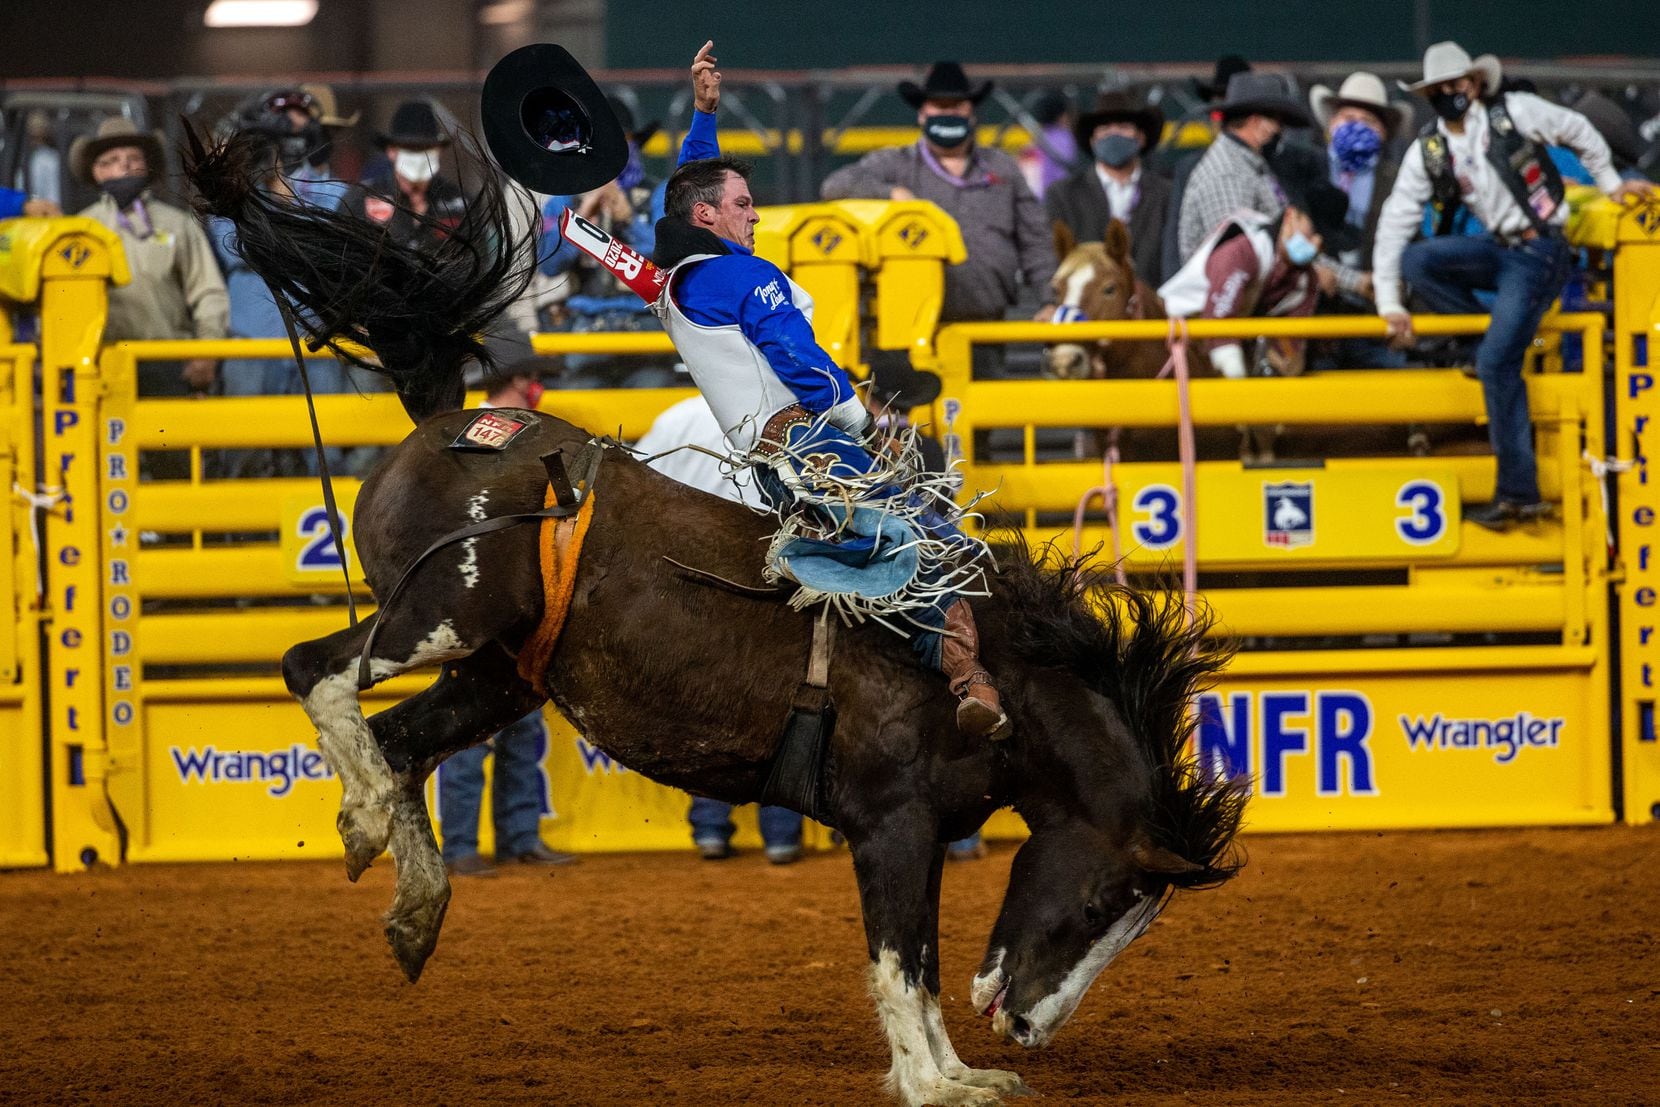 Photos: National Finals Rodeo is back in town — see the best moments